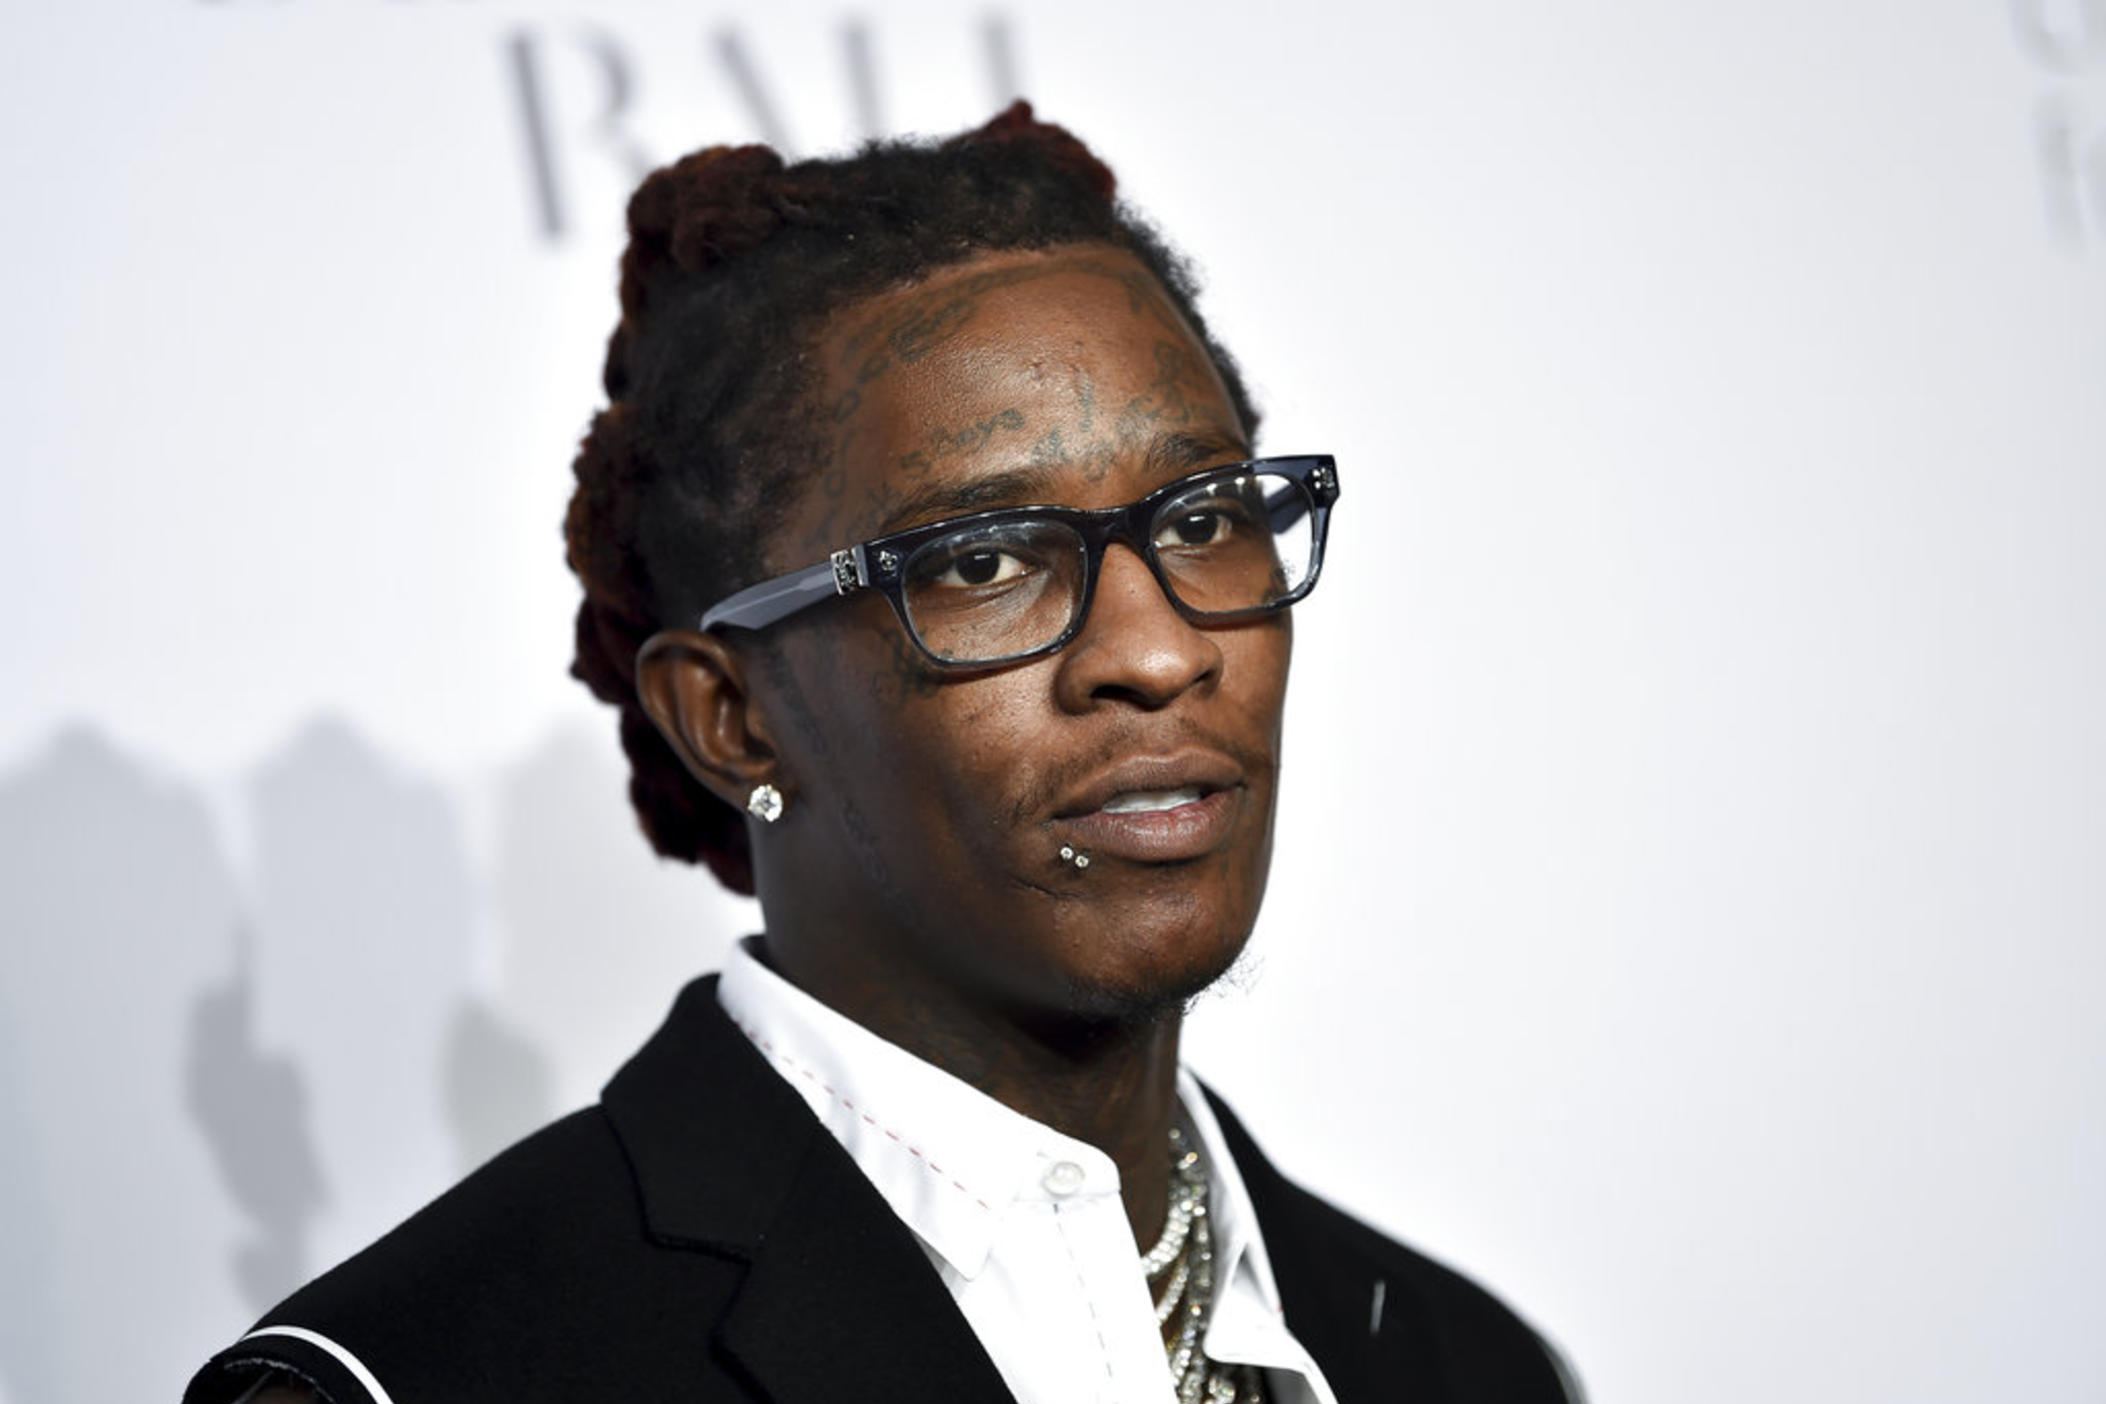 Young Thug attends the 3rd Annual Diamond Ball at Cipriani Wall Street on Thursday, Sept. 14, 2017, in New York.